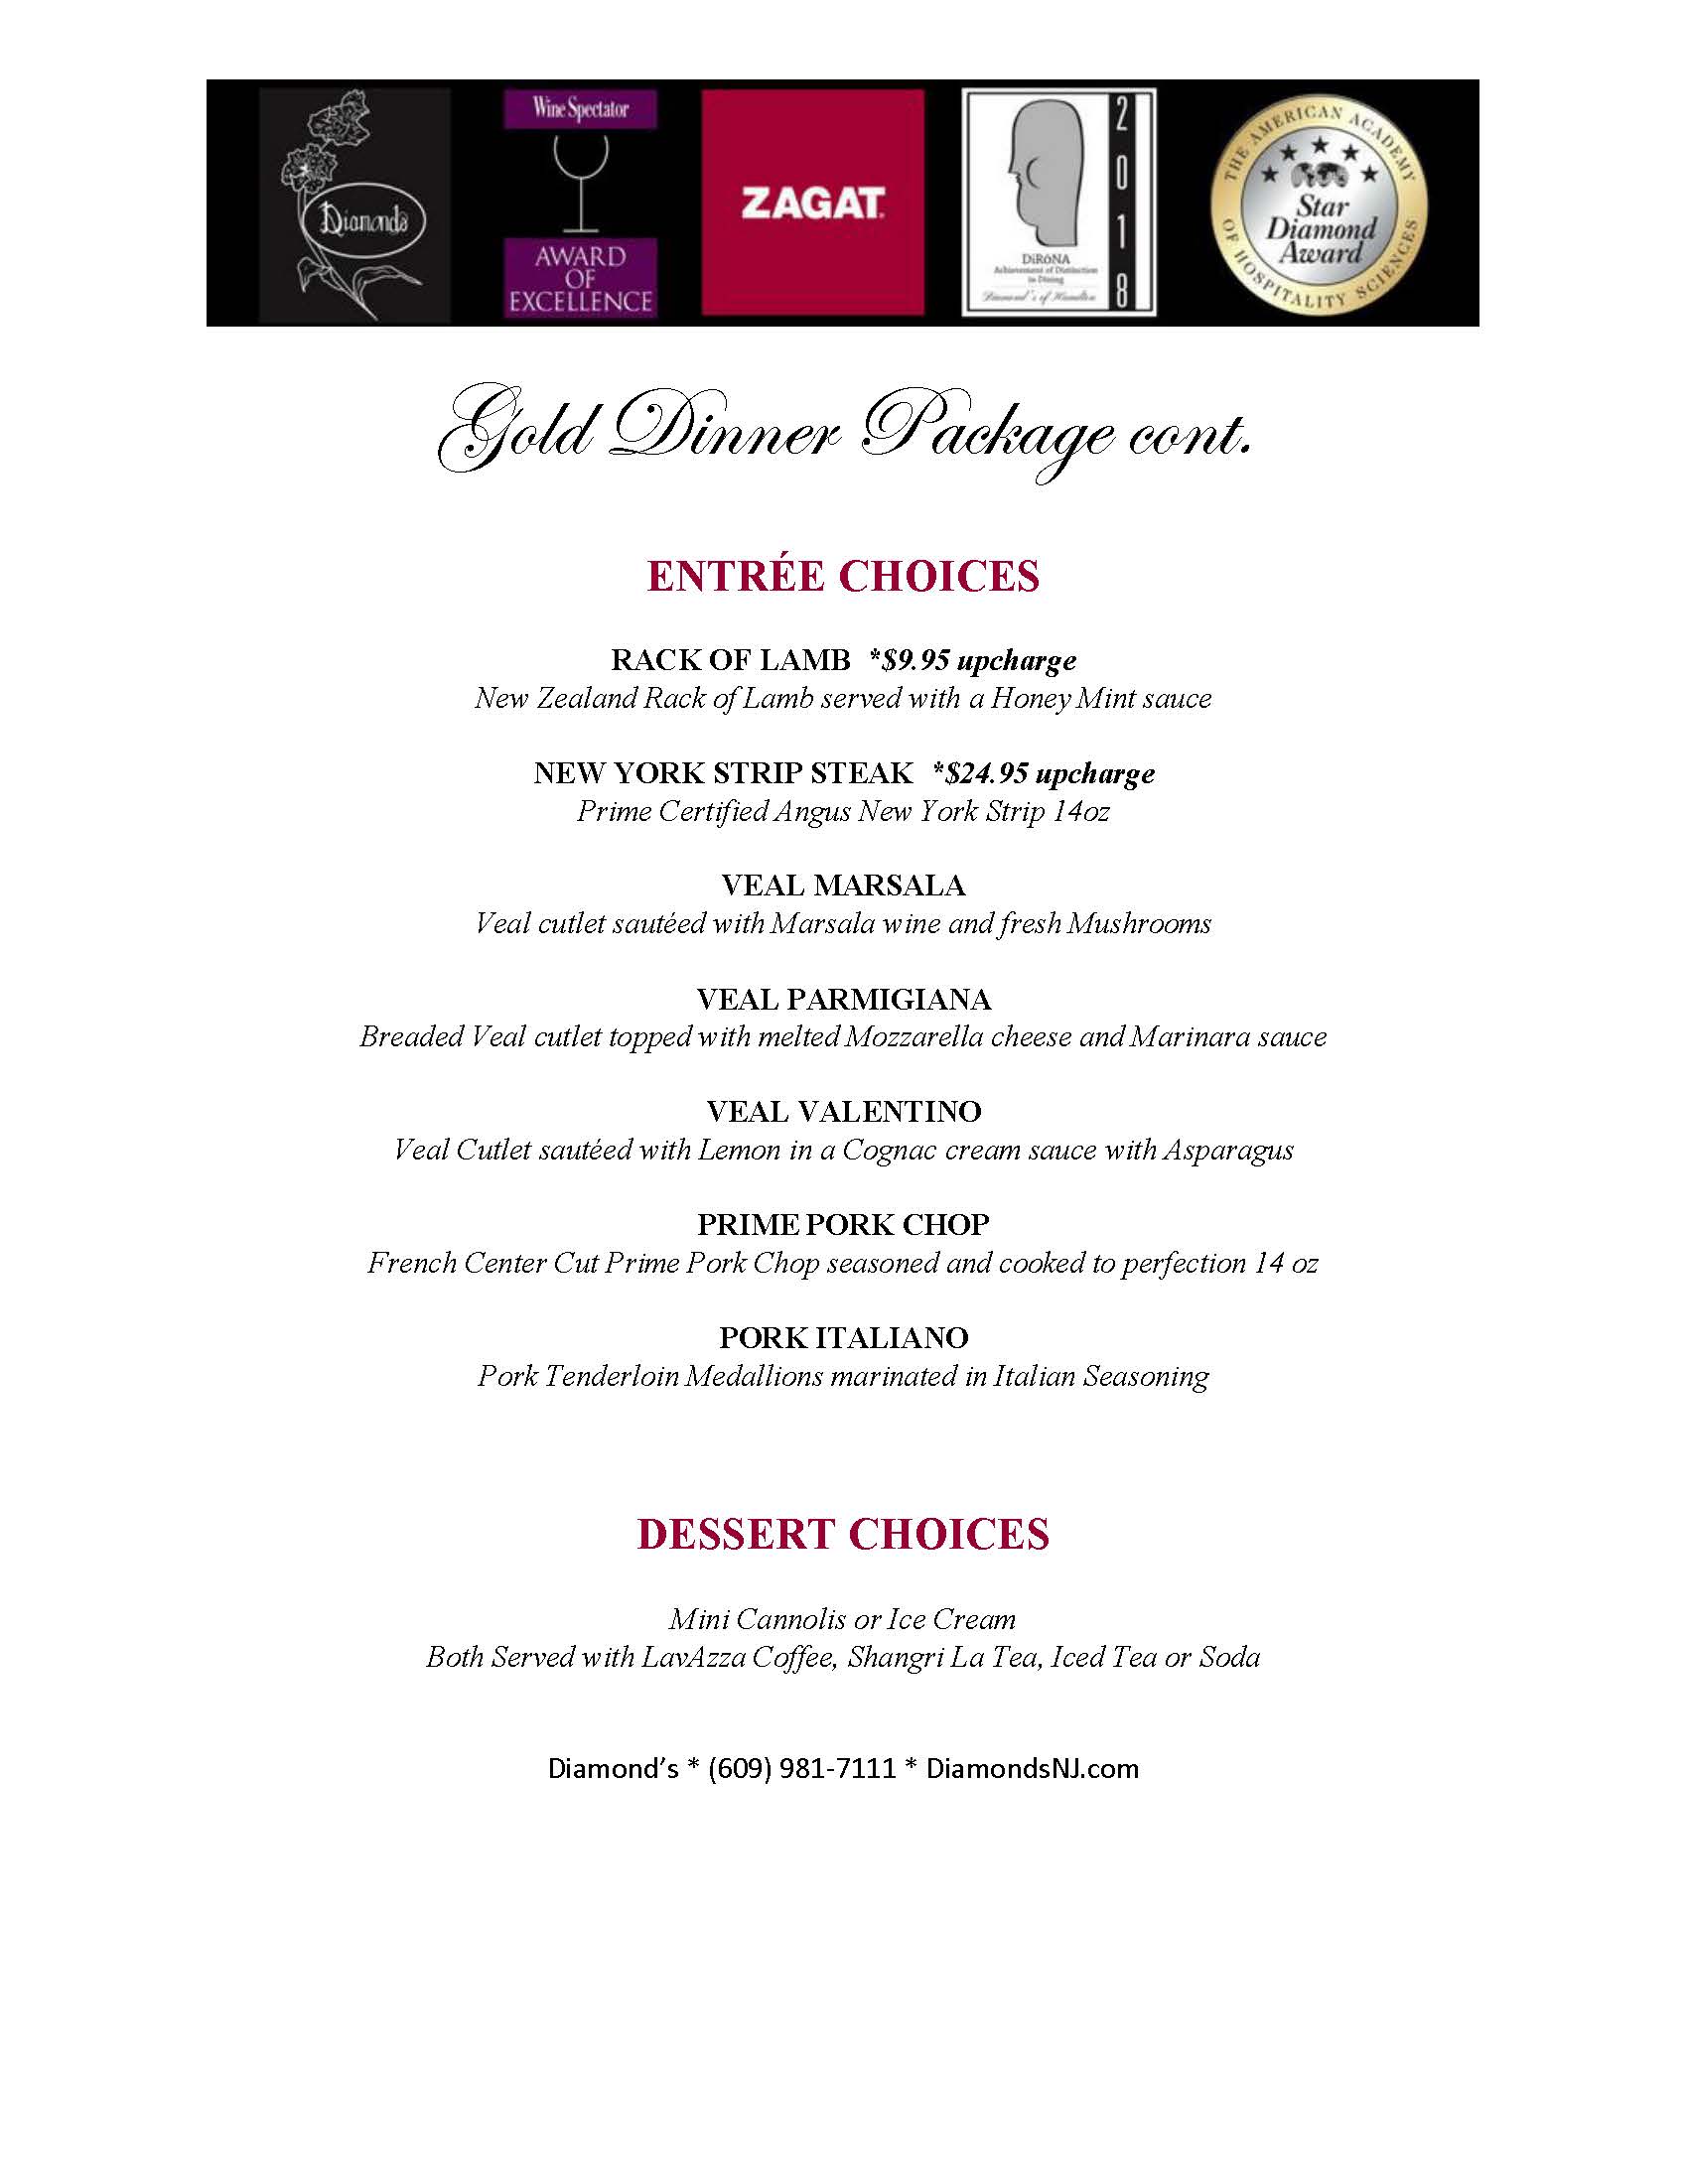 The menu for the gold dinner package.